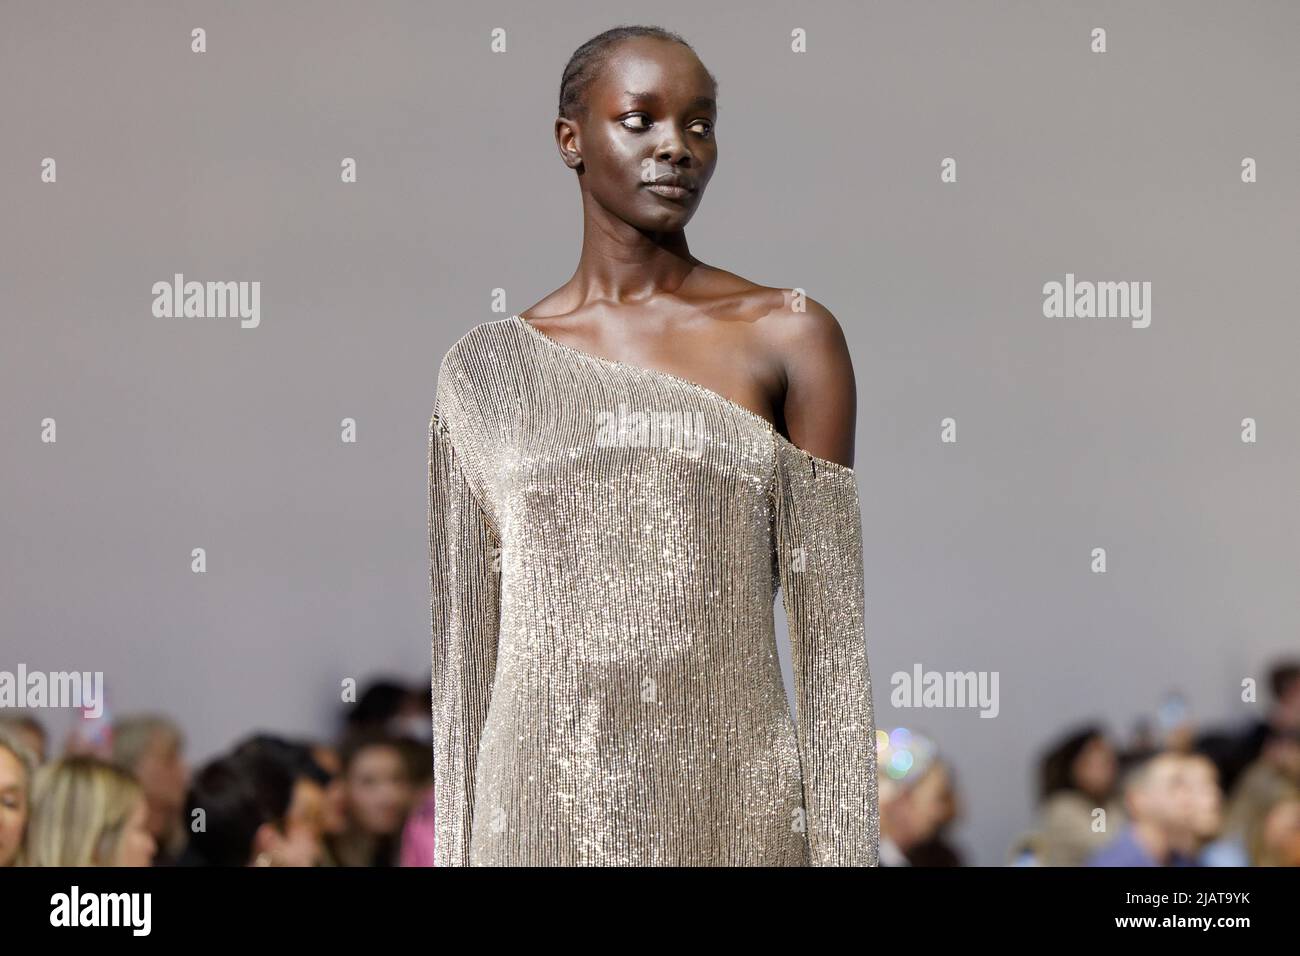 Model Ayoul Manyok walks the runway during the BEARE PARK show during the Afterpay Australian Fashion Week 2022 at Carriageworks on May 9, 2022 in Syd Stock Photo